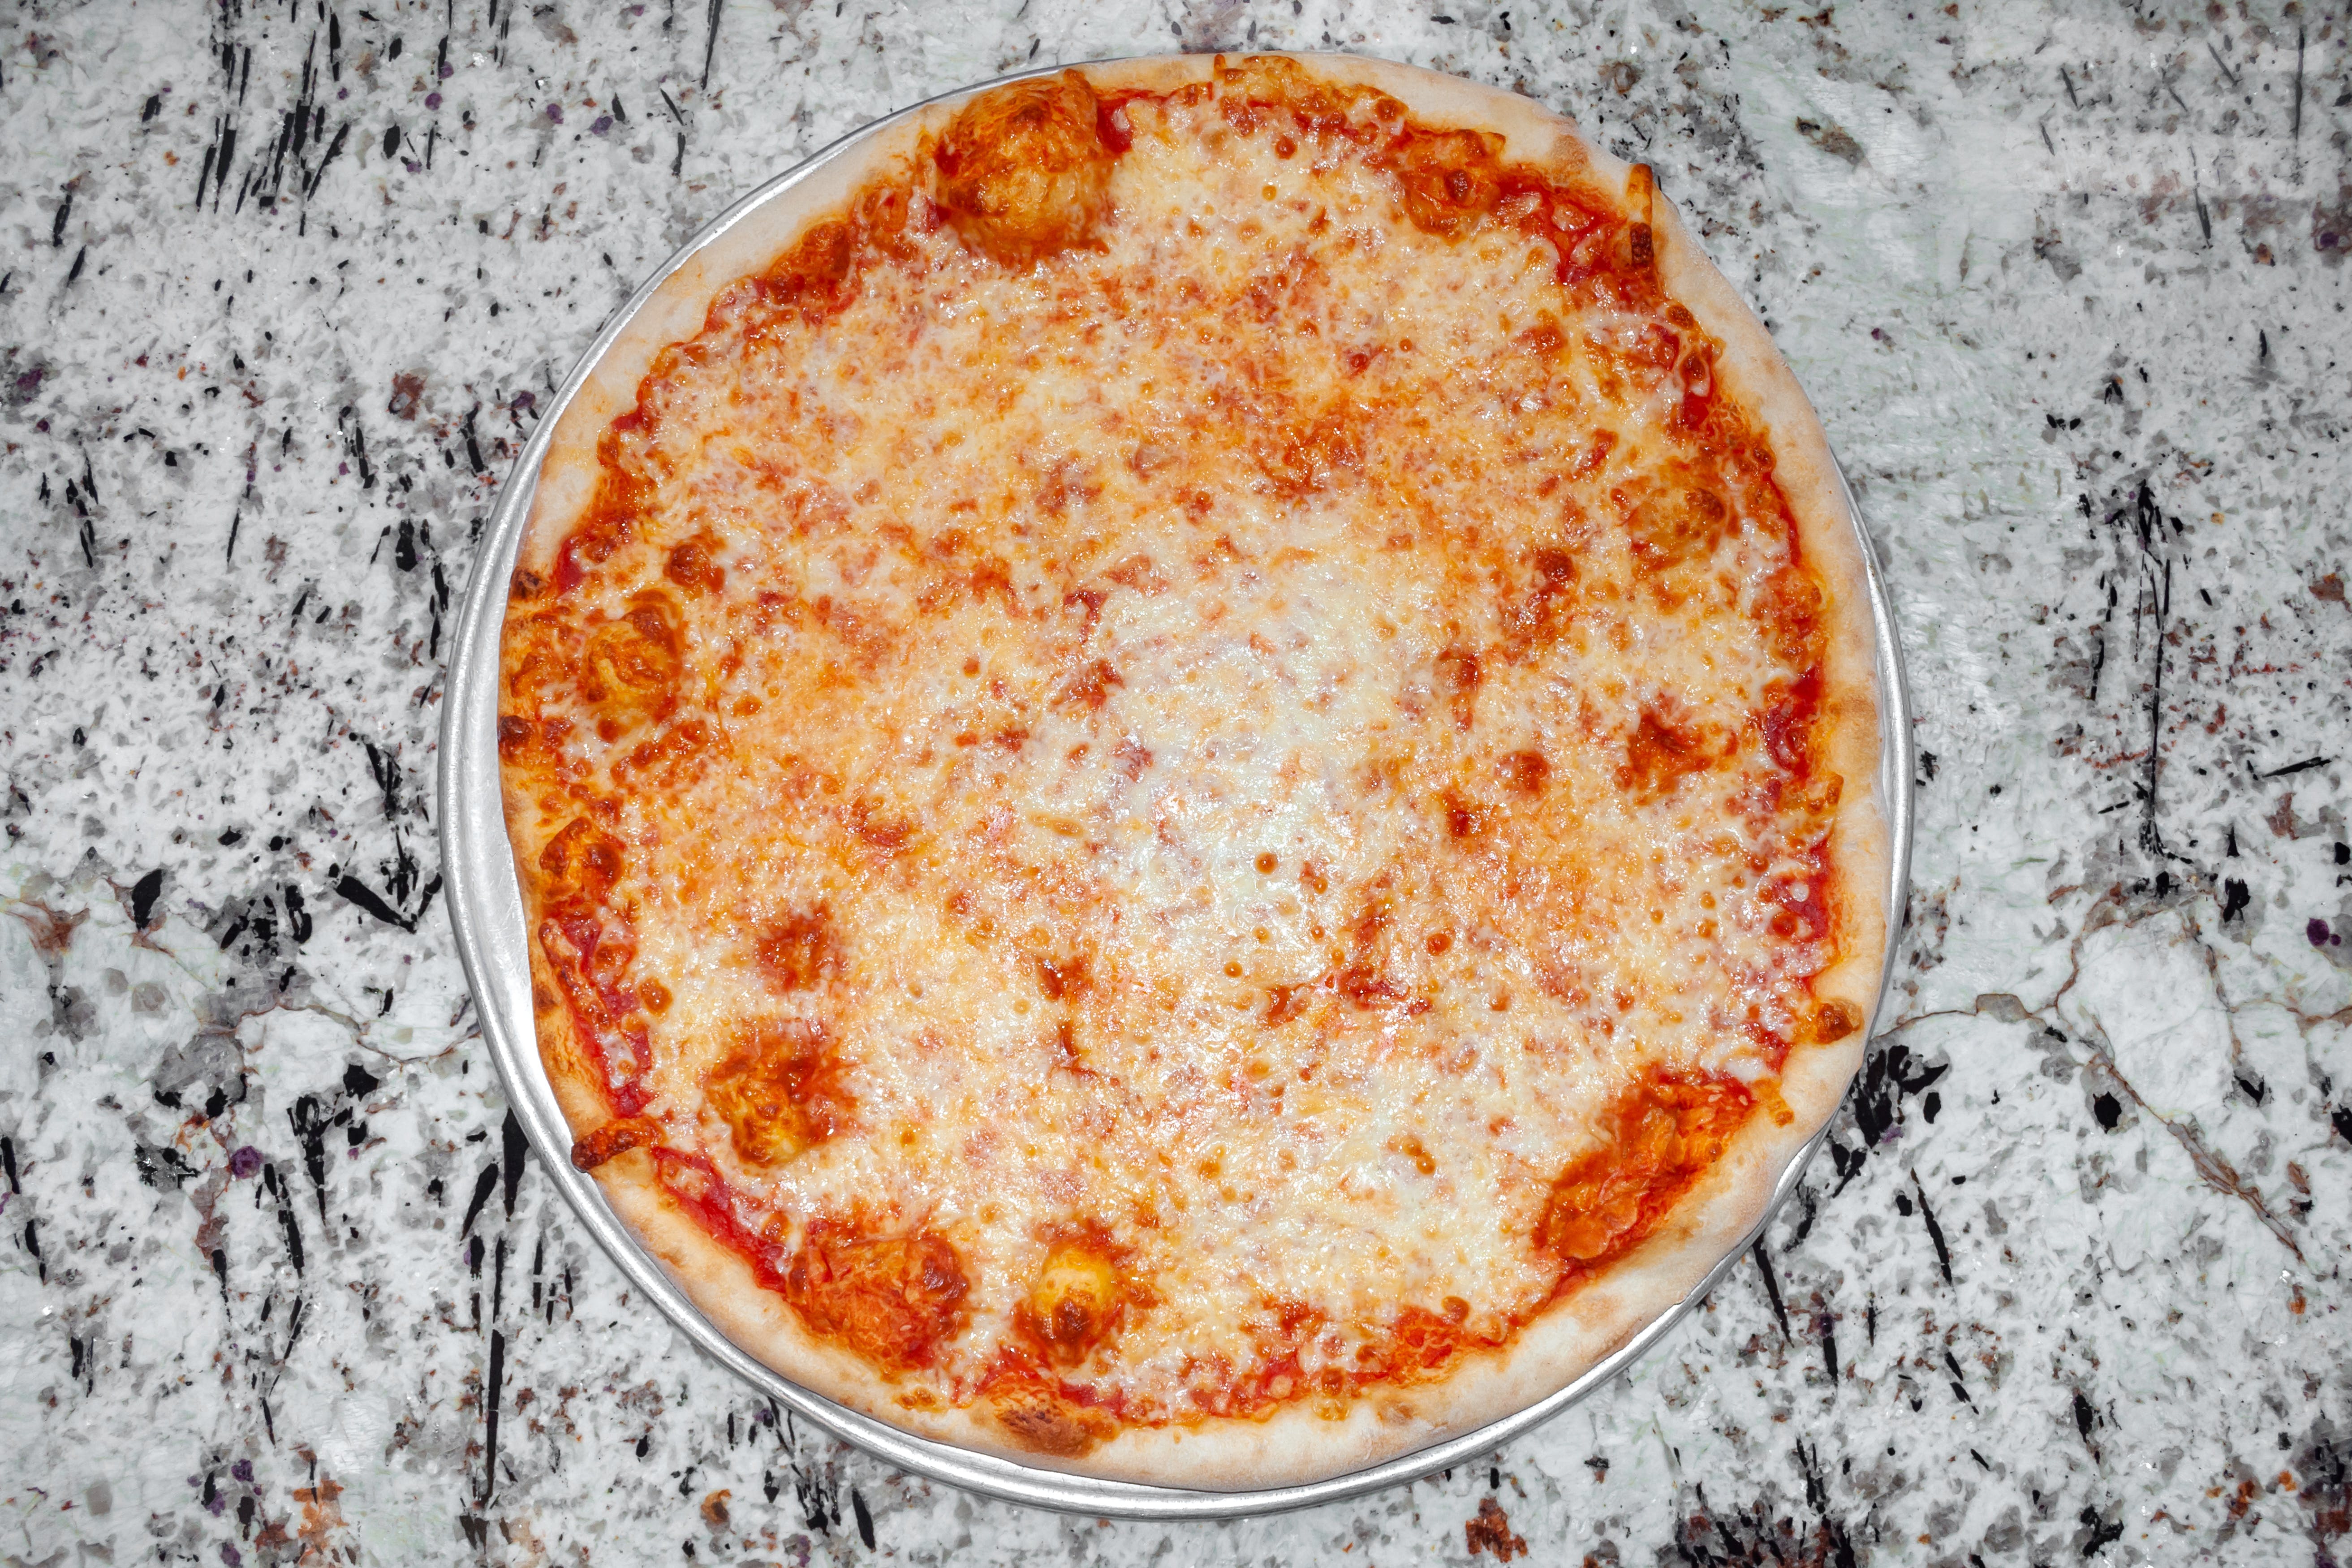 mimo's Pizza Review at Sicilian Oven